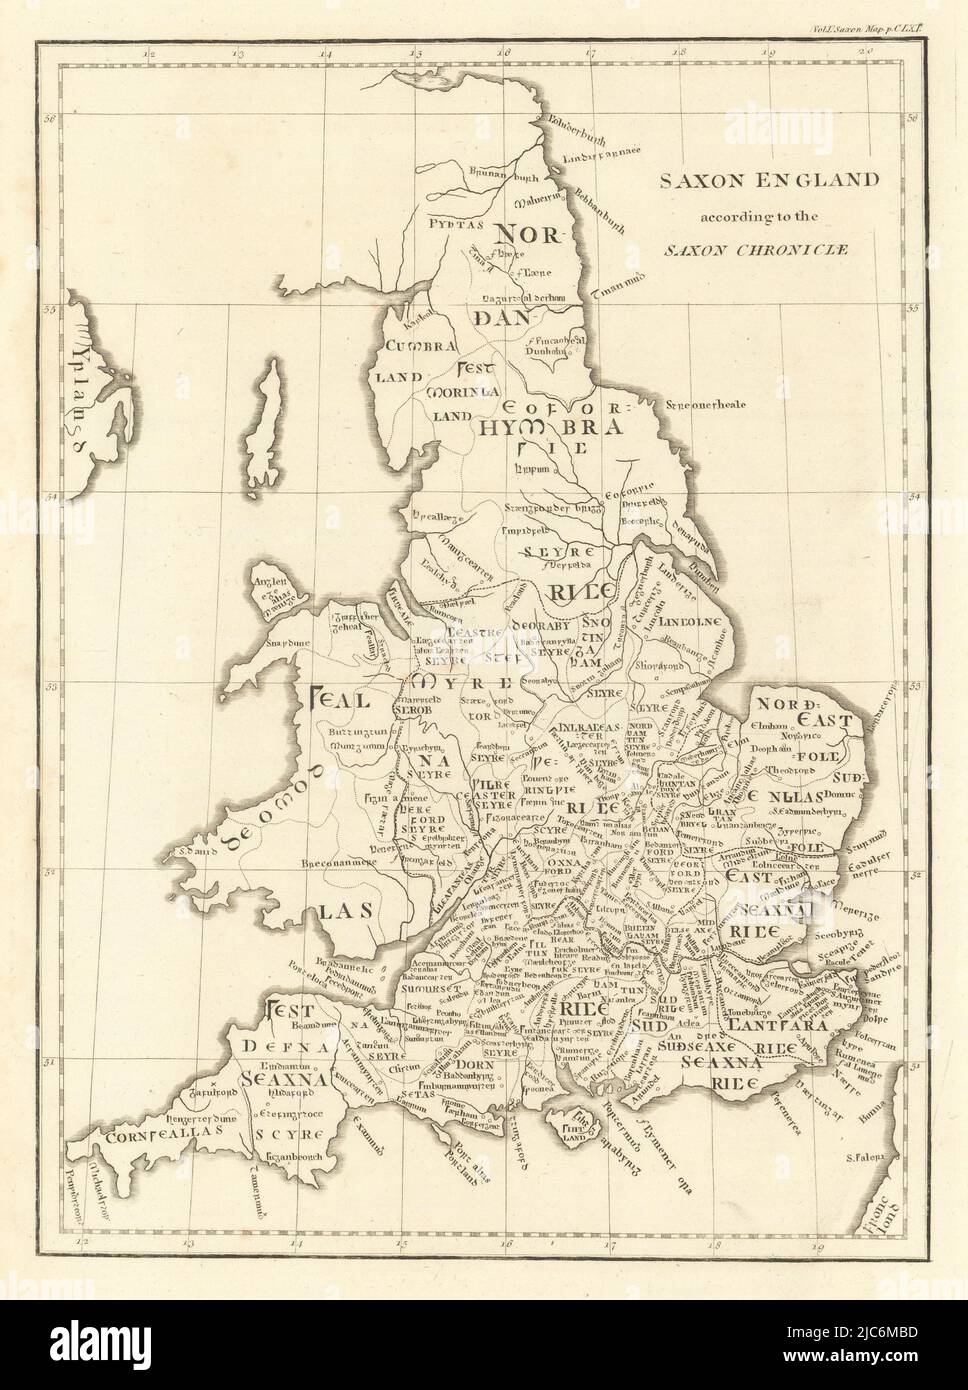 'Saxon England according to the Saxon Chronicle', by John CARY 1806 old map Stock Photo